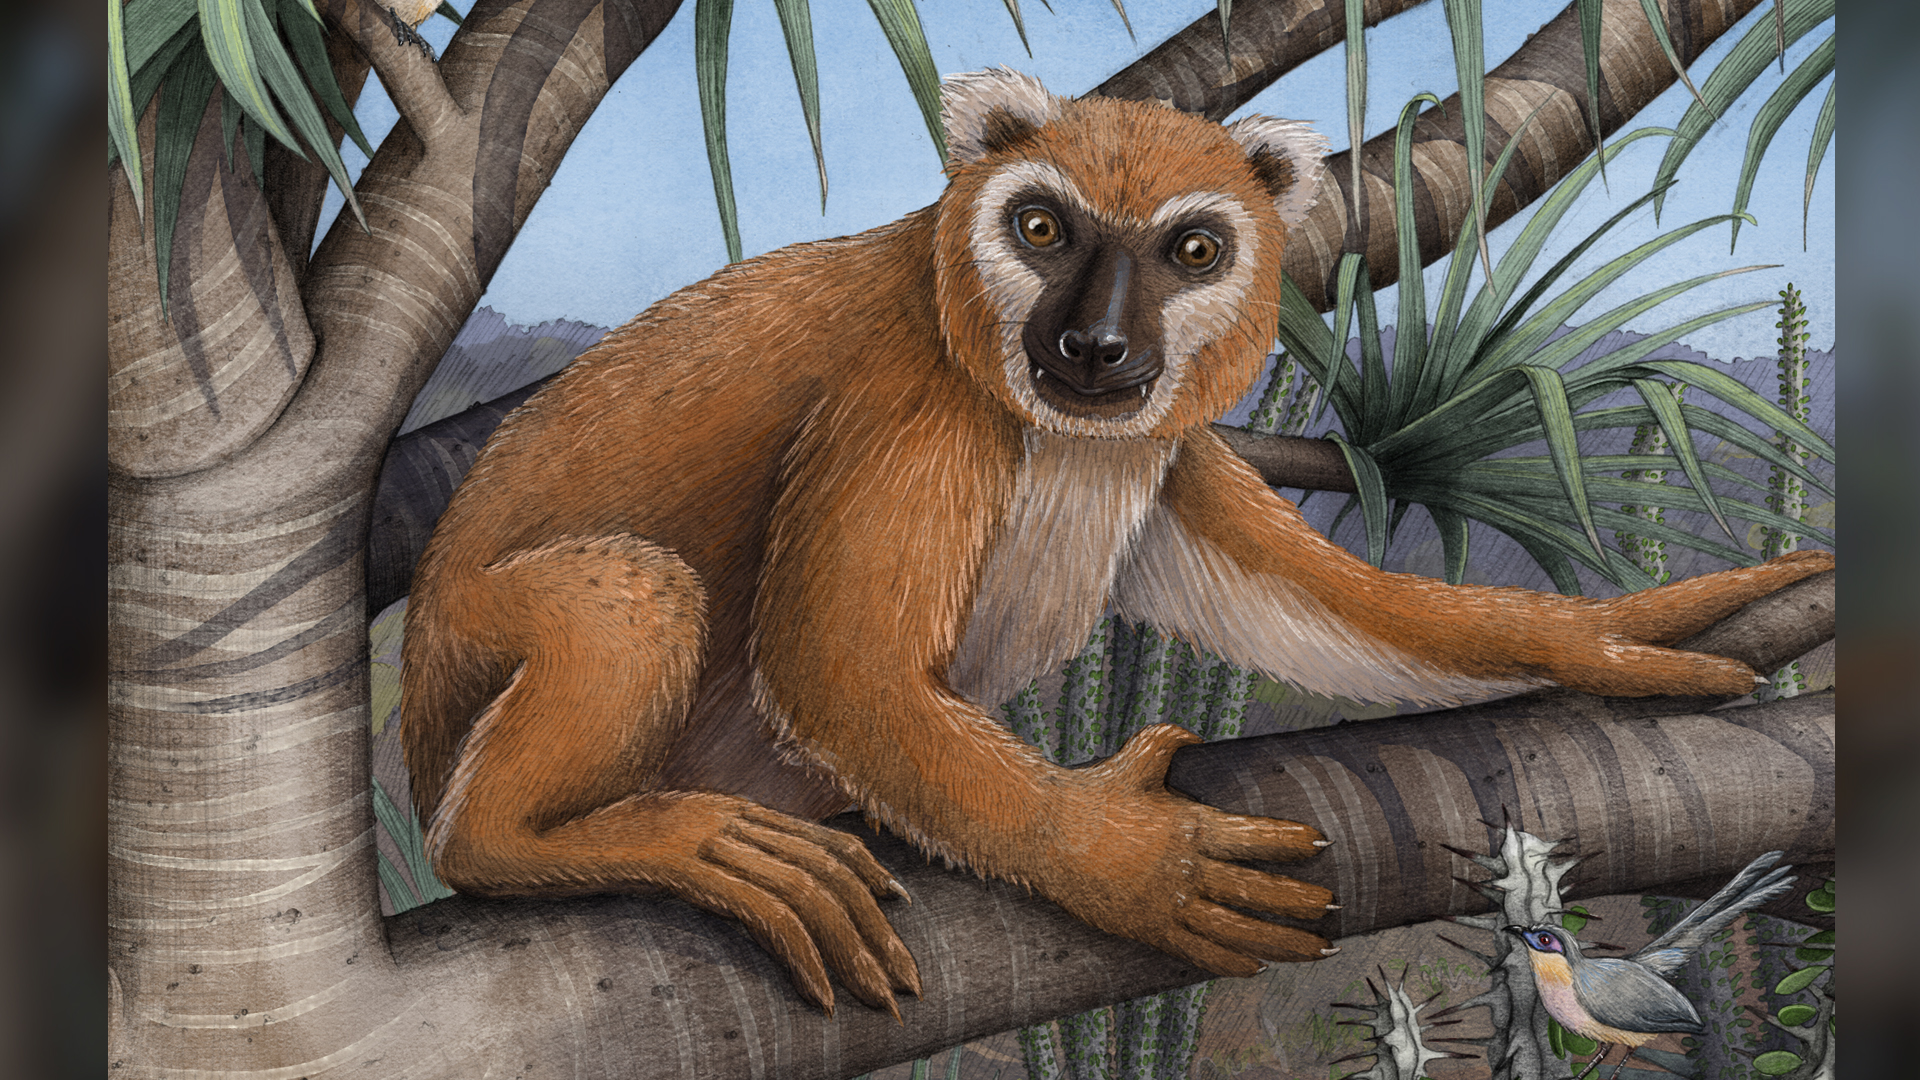 This giant, leaf-eating lemur was the size of a human and had paws like a  koala | Live Science